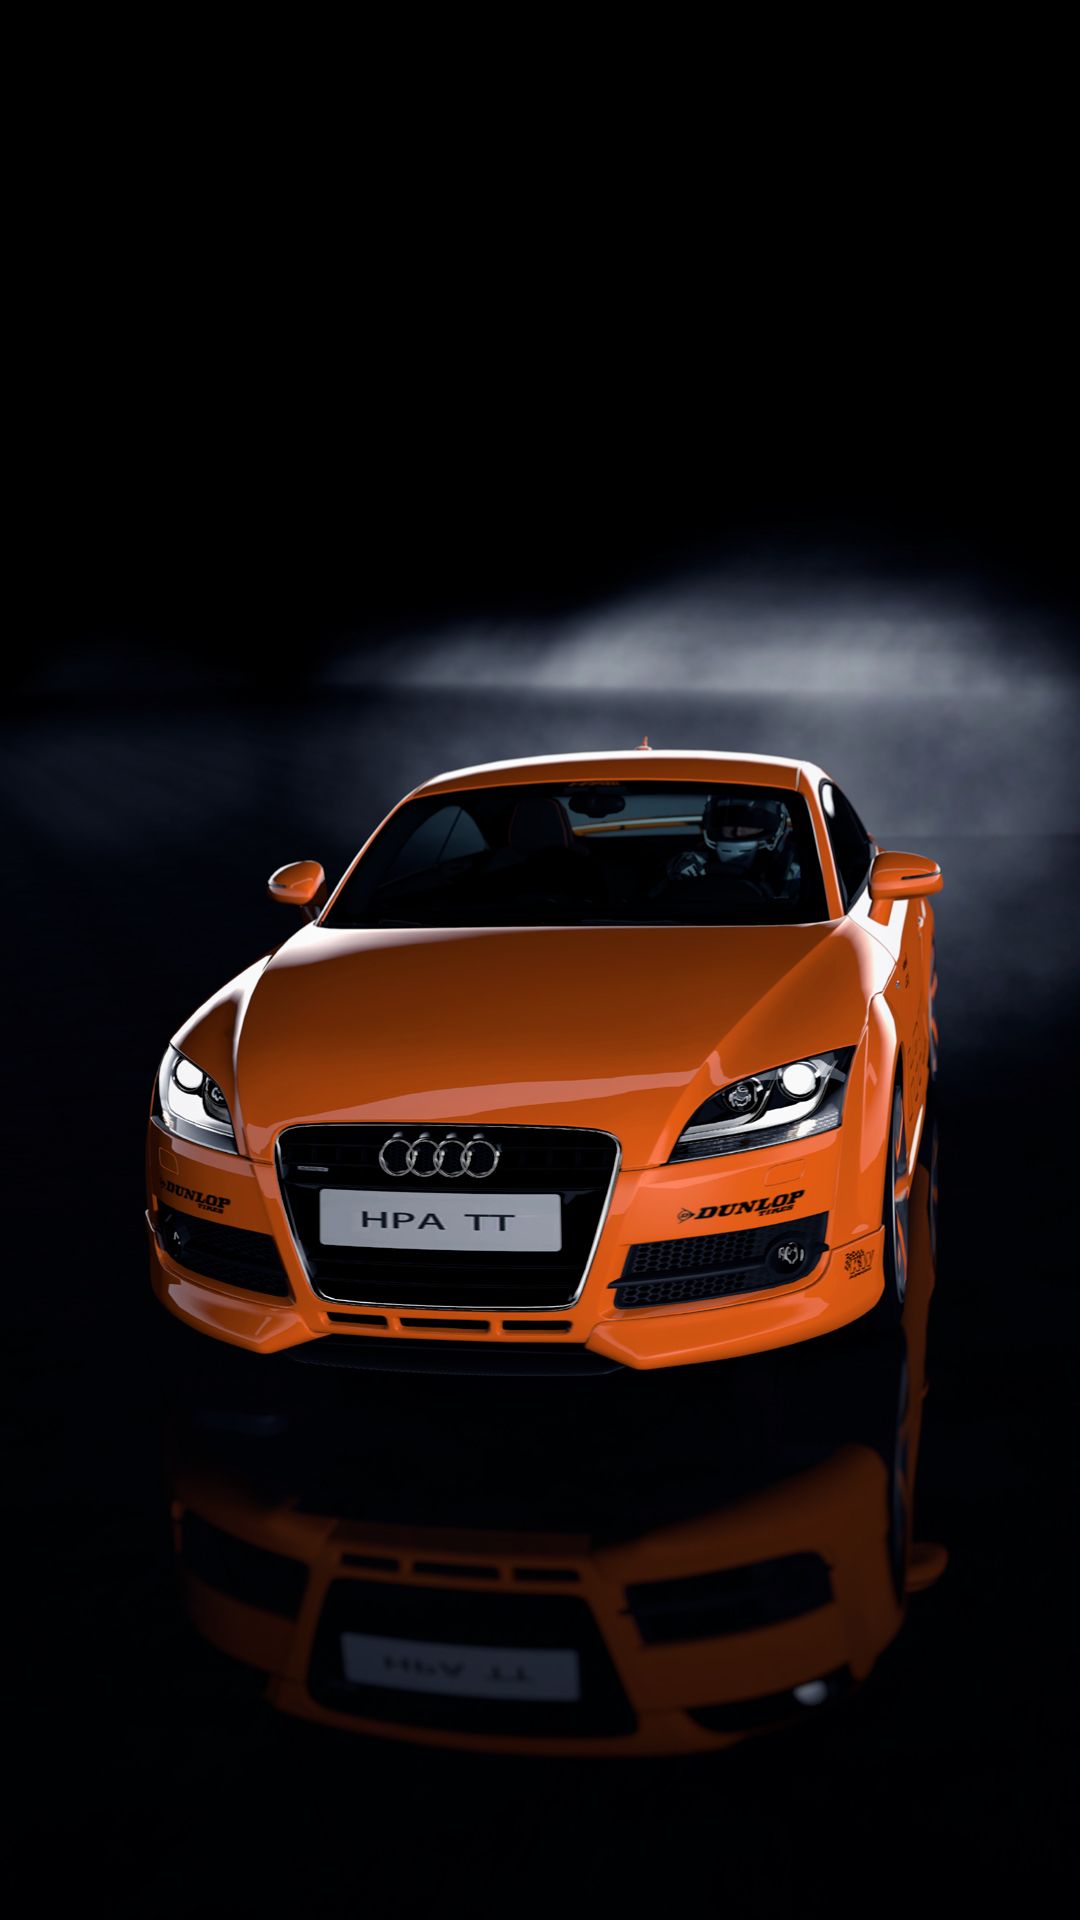 Audi TTK wallpaper, free and easy to download